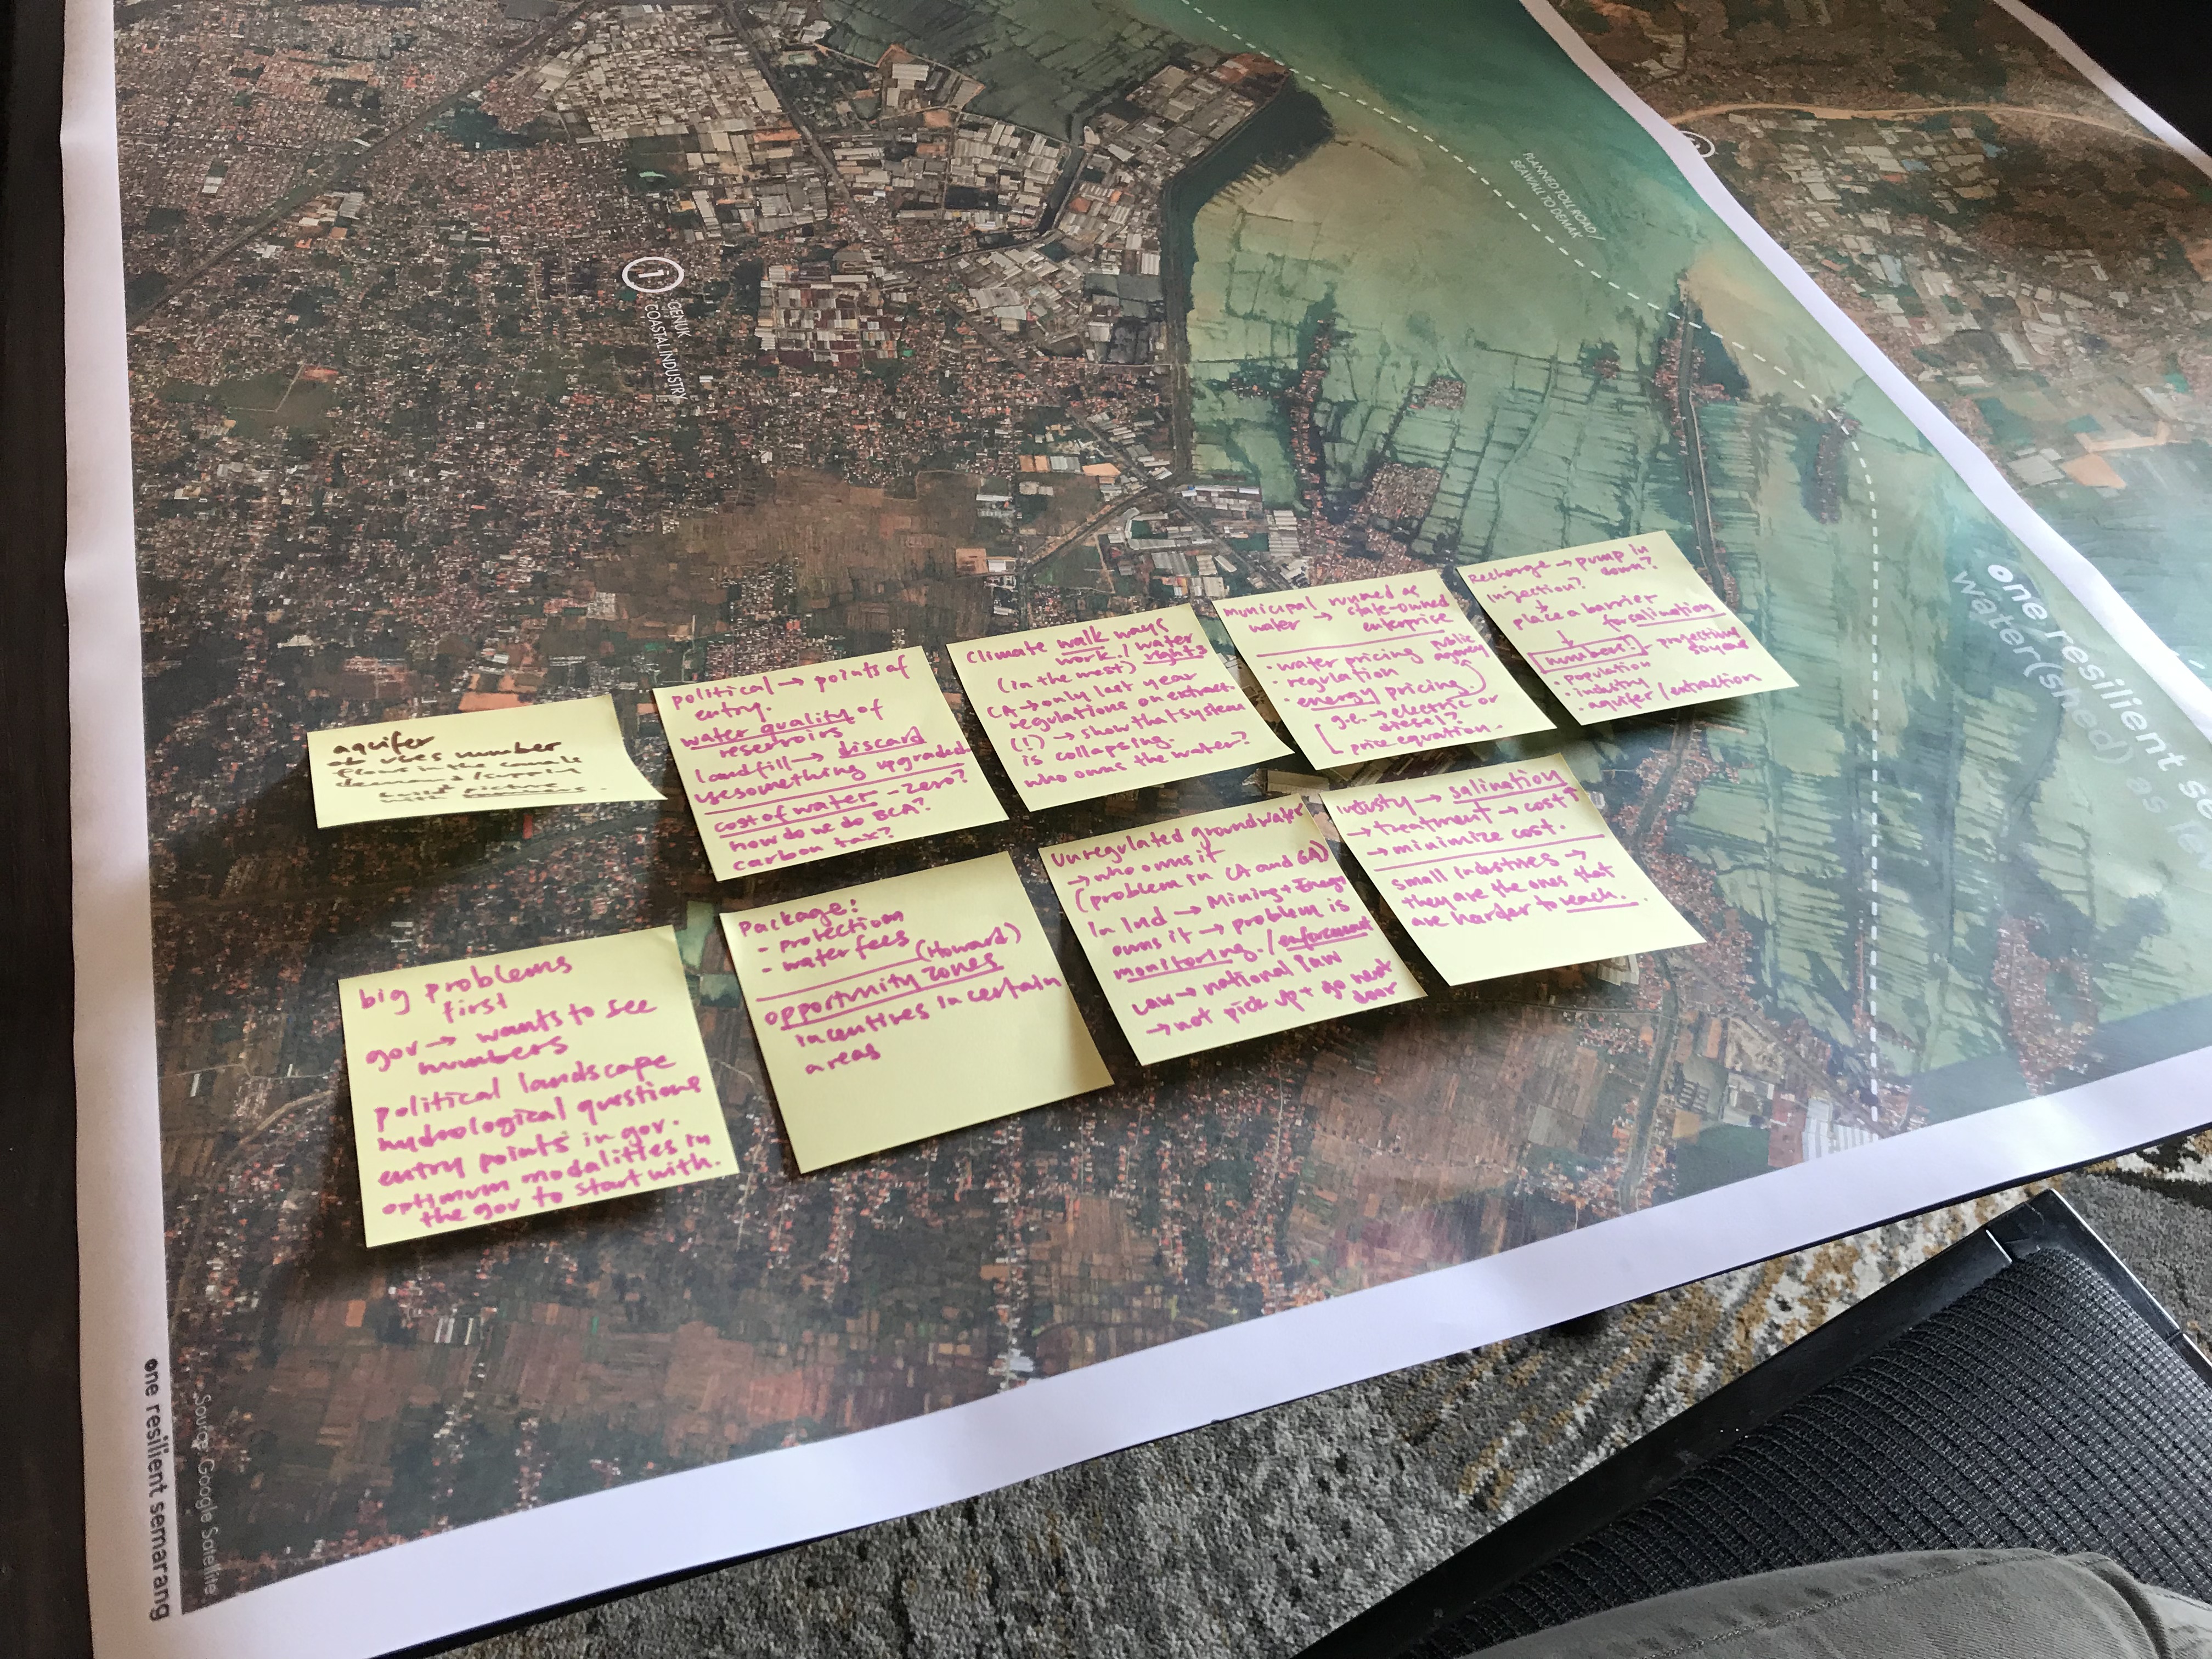 Post-it notes with pink hand-written comments overlay a map of a coastal area.